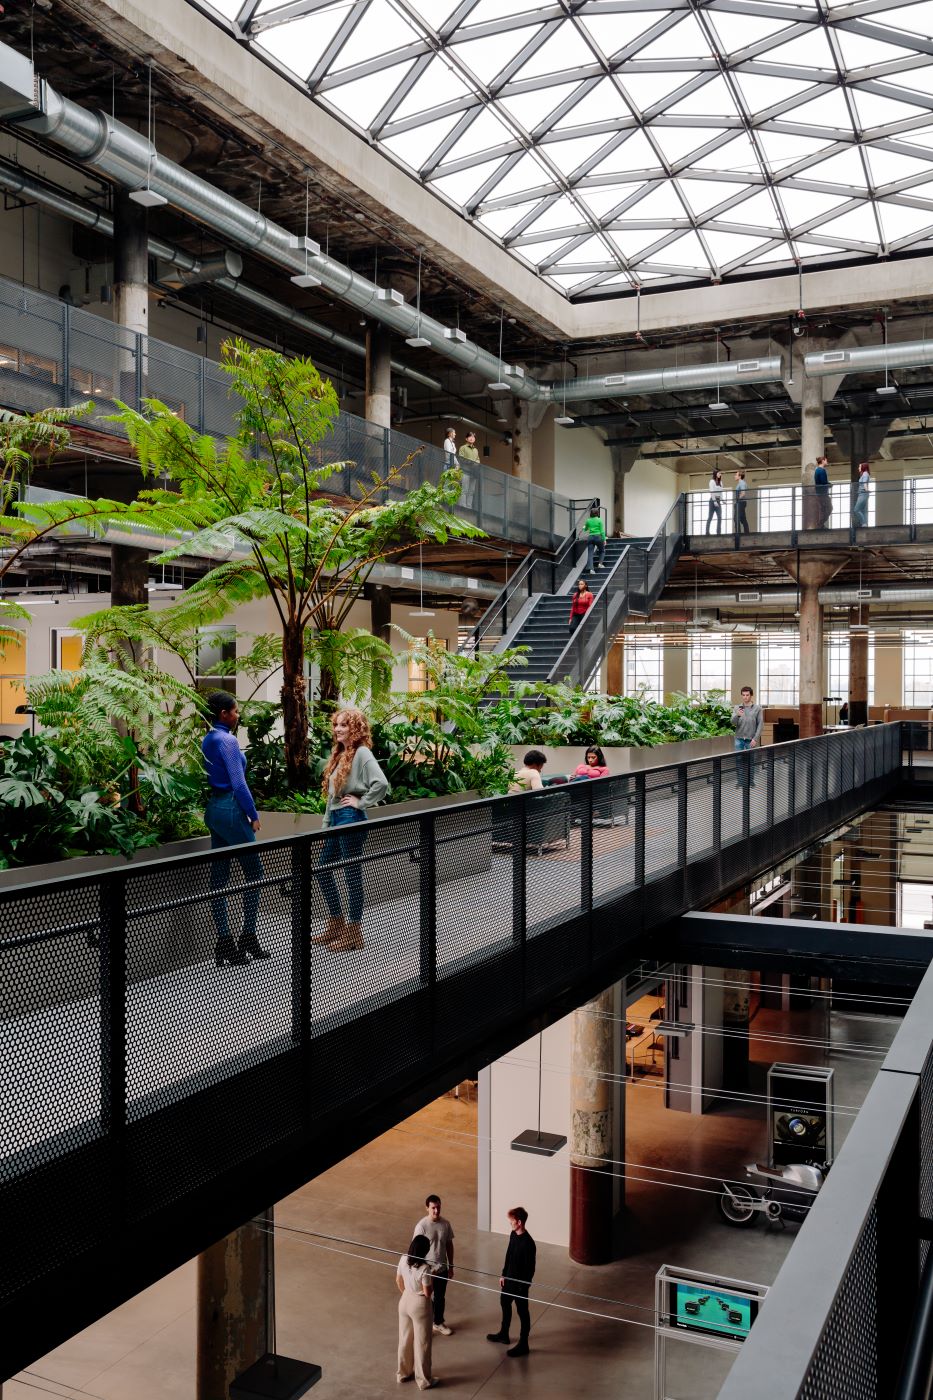 Internal atrium with plants and people chatting